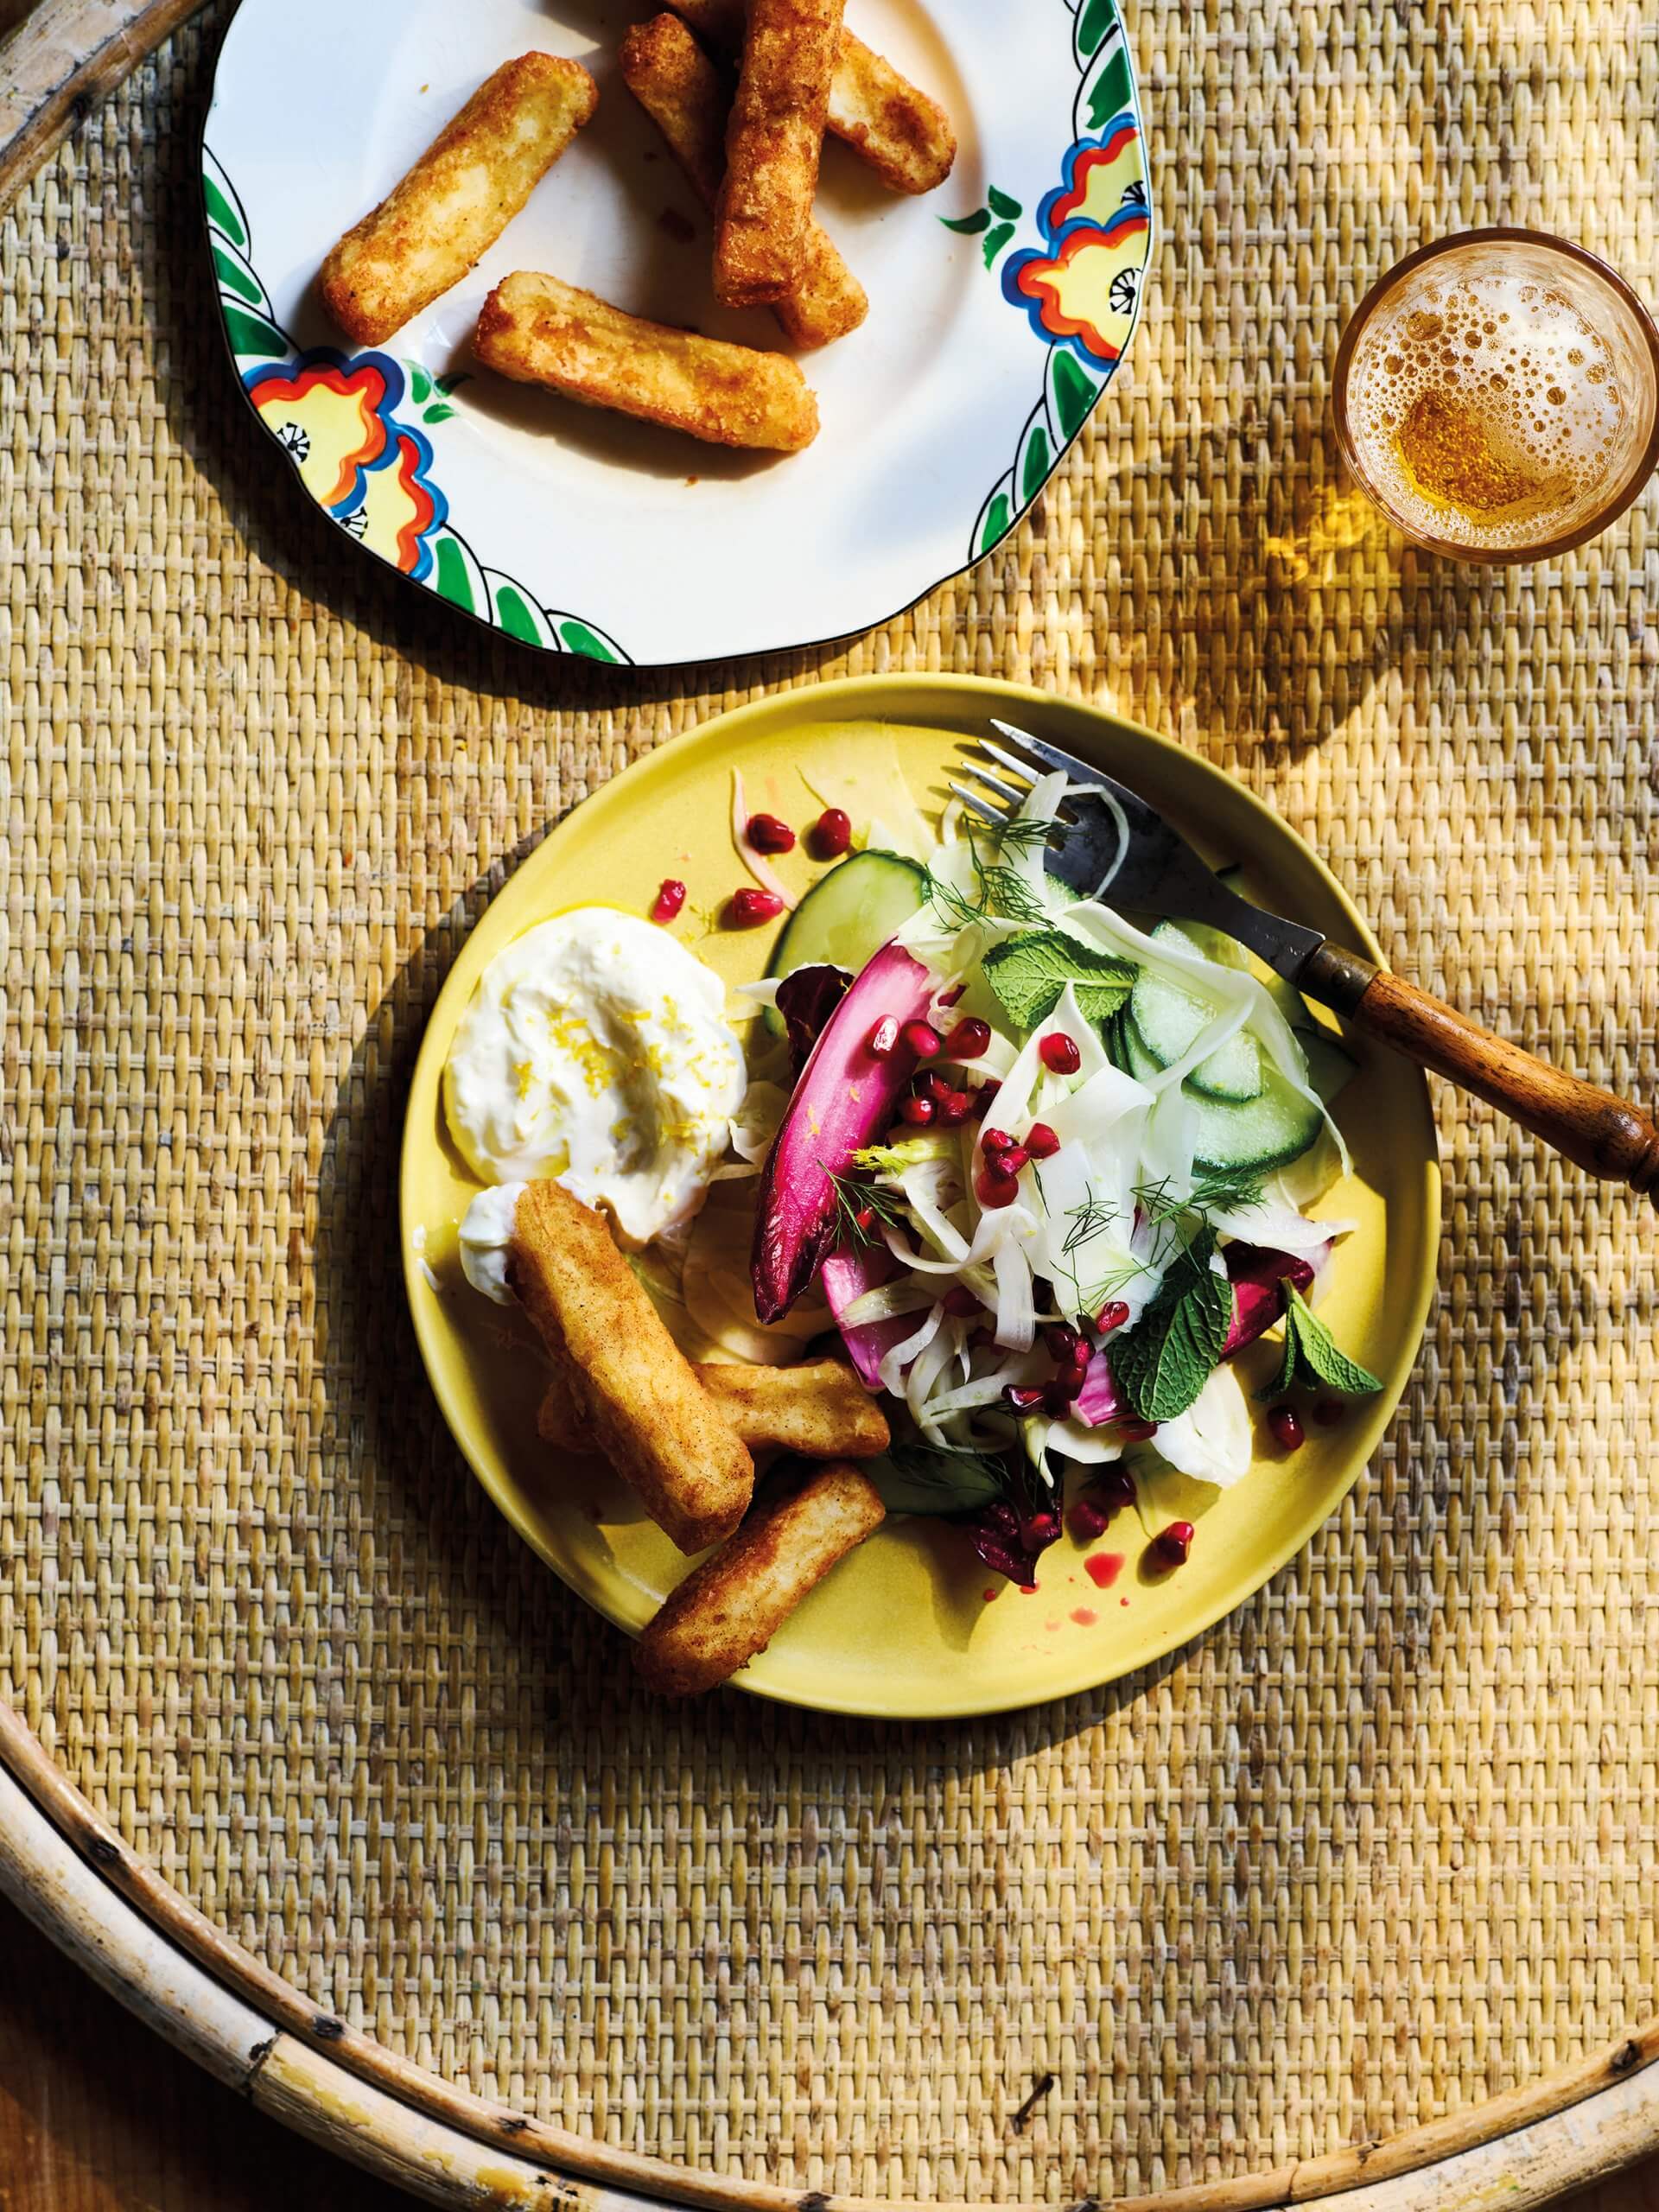 A yellow plate with salad and potato wedges on a woven yellow table surface